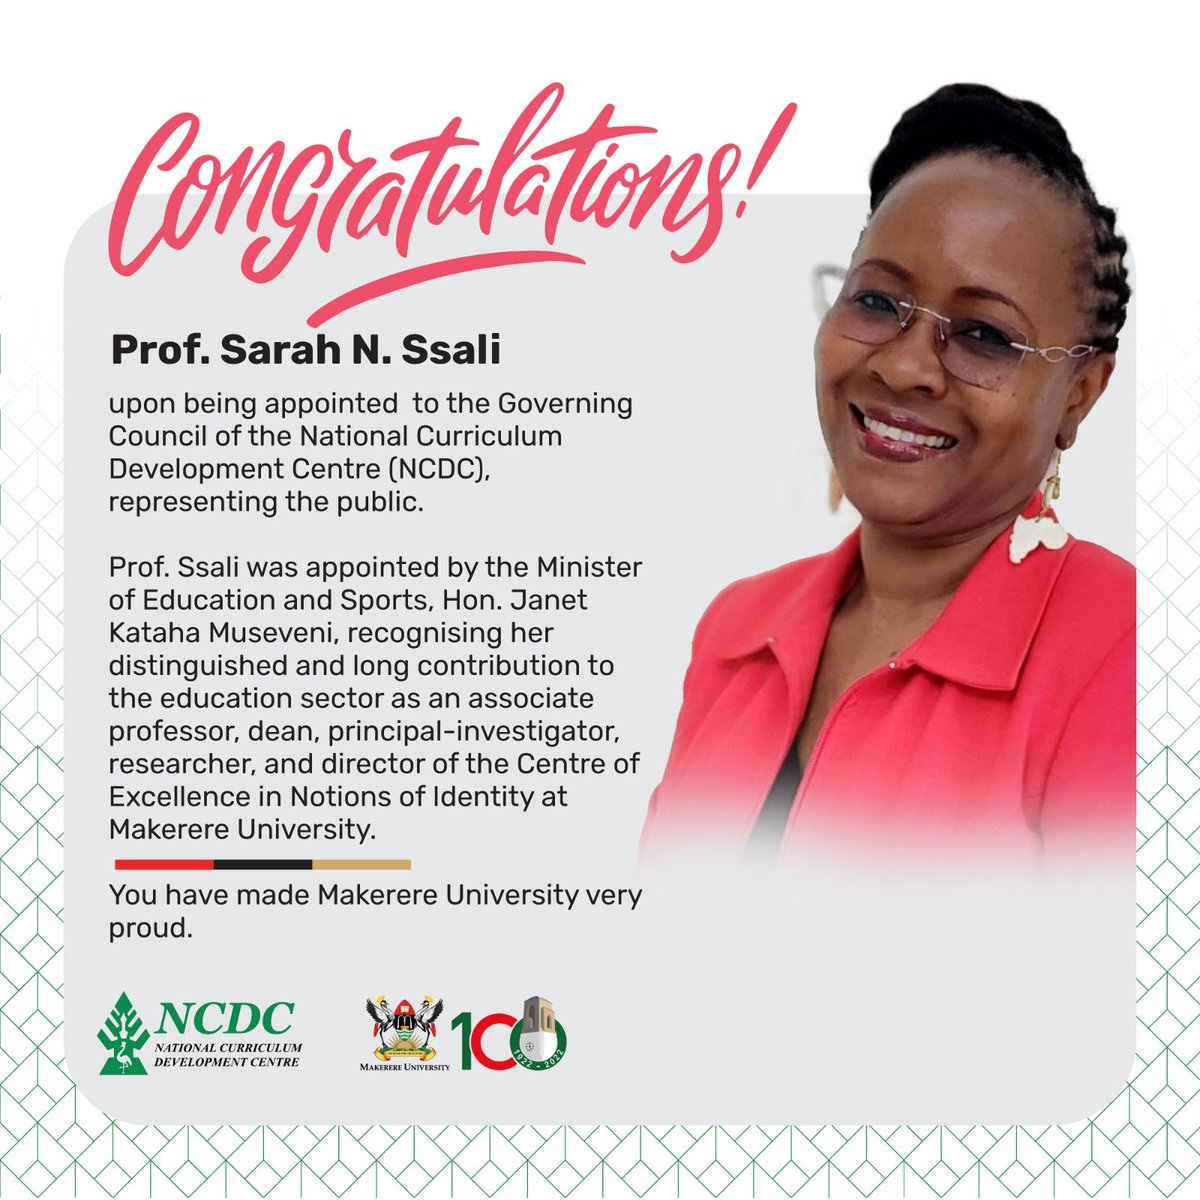 Congratulations Prof. @SsaliSarah upon your meritorious appointment by Hon. @JanetMuseveni @Educ_SportsUg to the Governing Council of @NCDCUg. We Build for the Future.